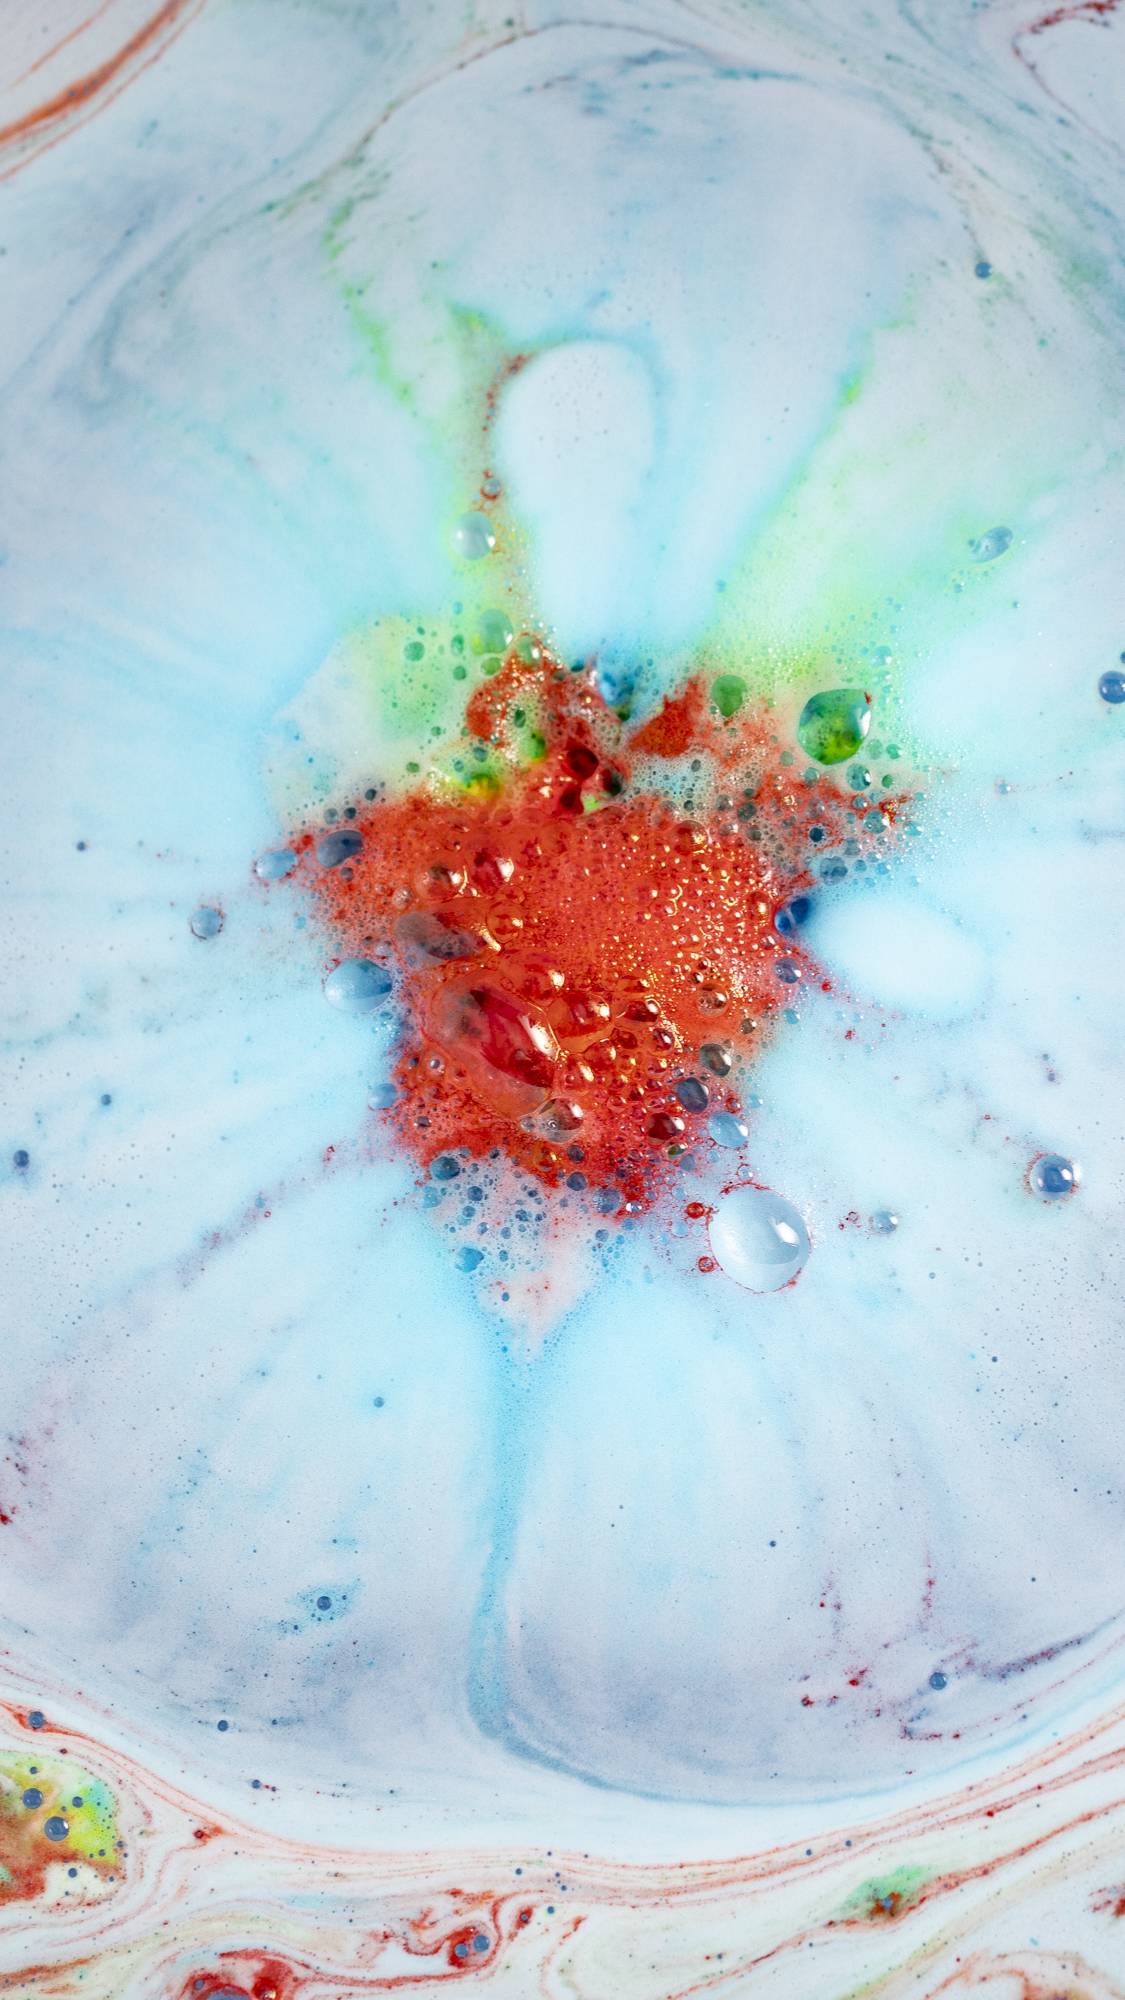 The Super Dad bath bomb has fully dissolved leaving a sea of thick blue foam with a bright flash of contrasting ruby-red burst in the centre.